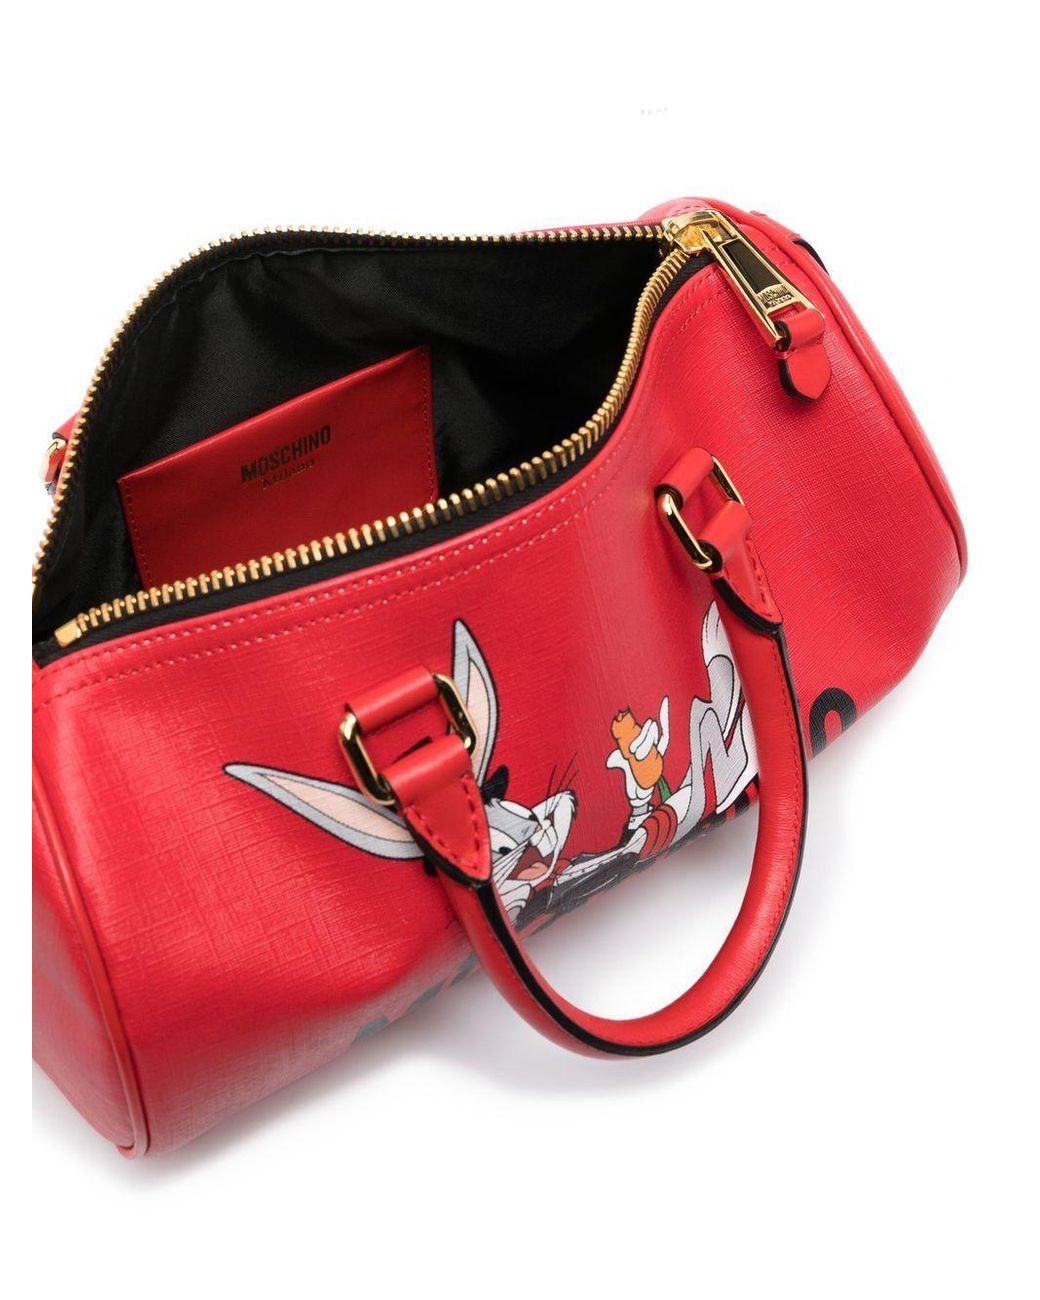 Moschino Bugs Bunny Print Tote Bag in Red | Lyst